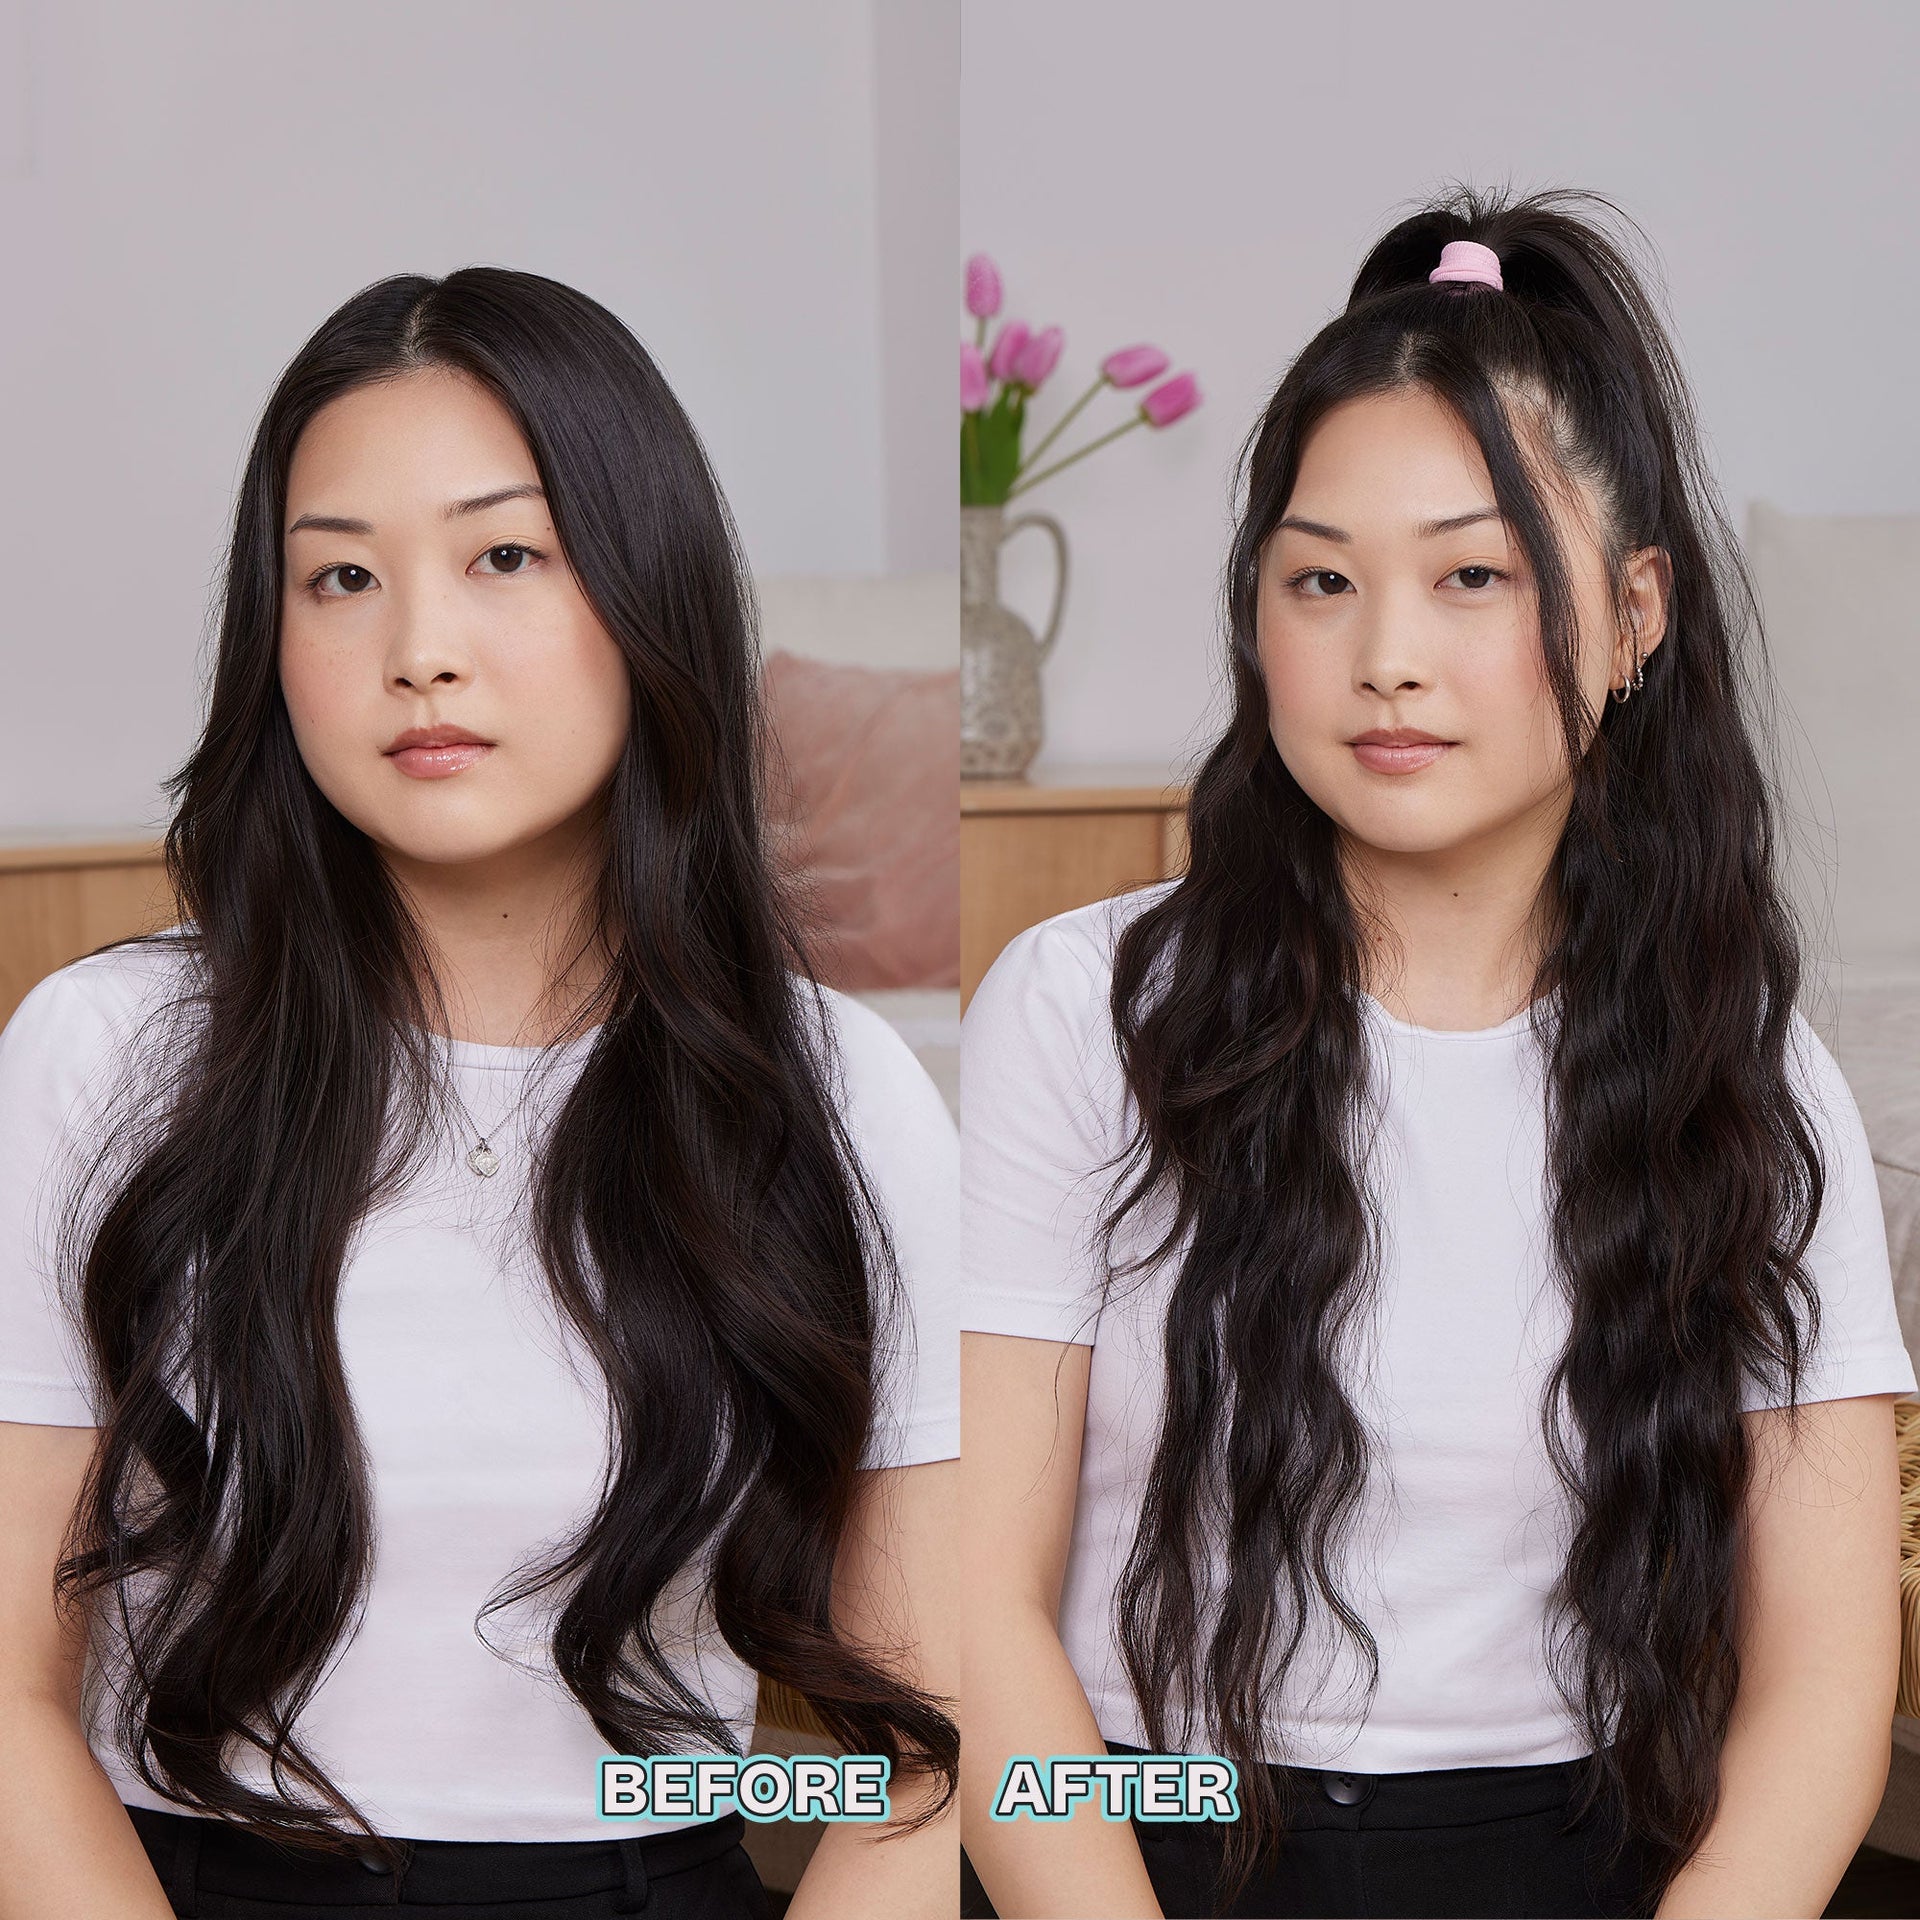 mane 1.25” Jumbo Hair Waver Styling Attachment before and after